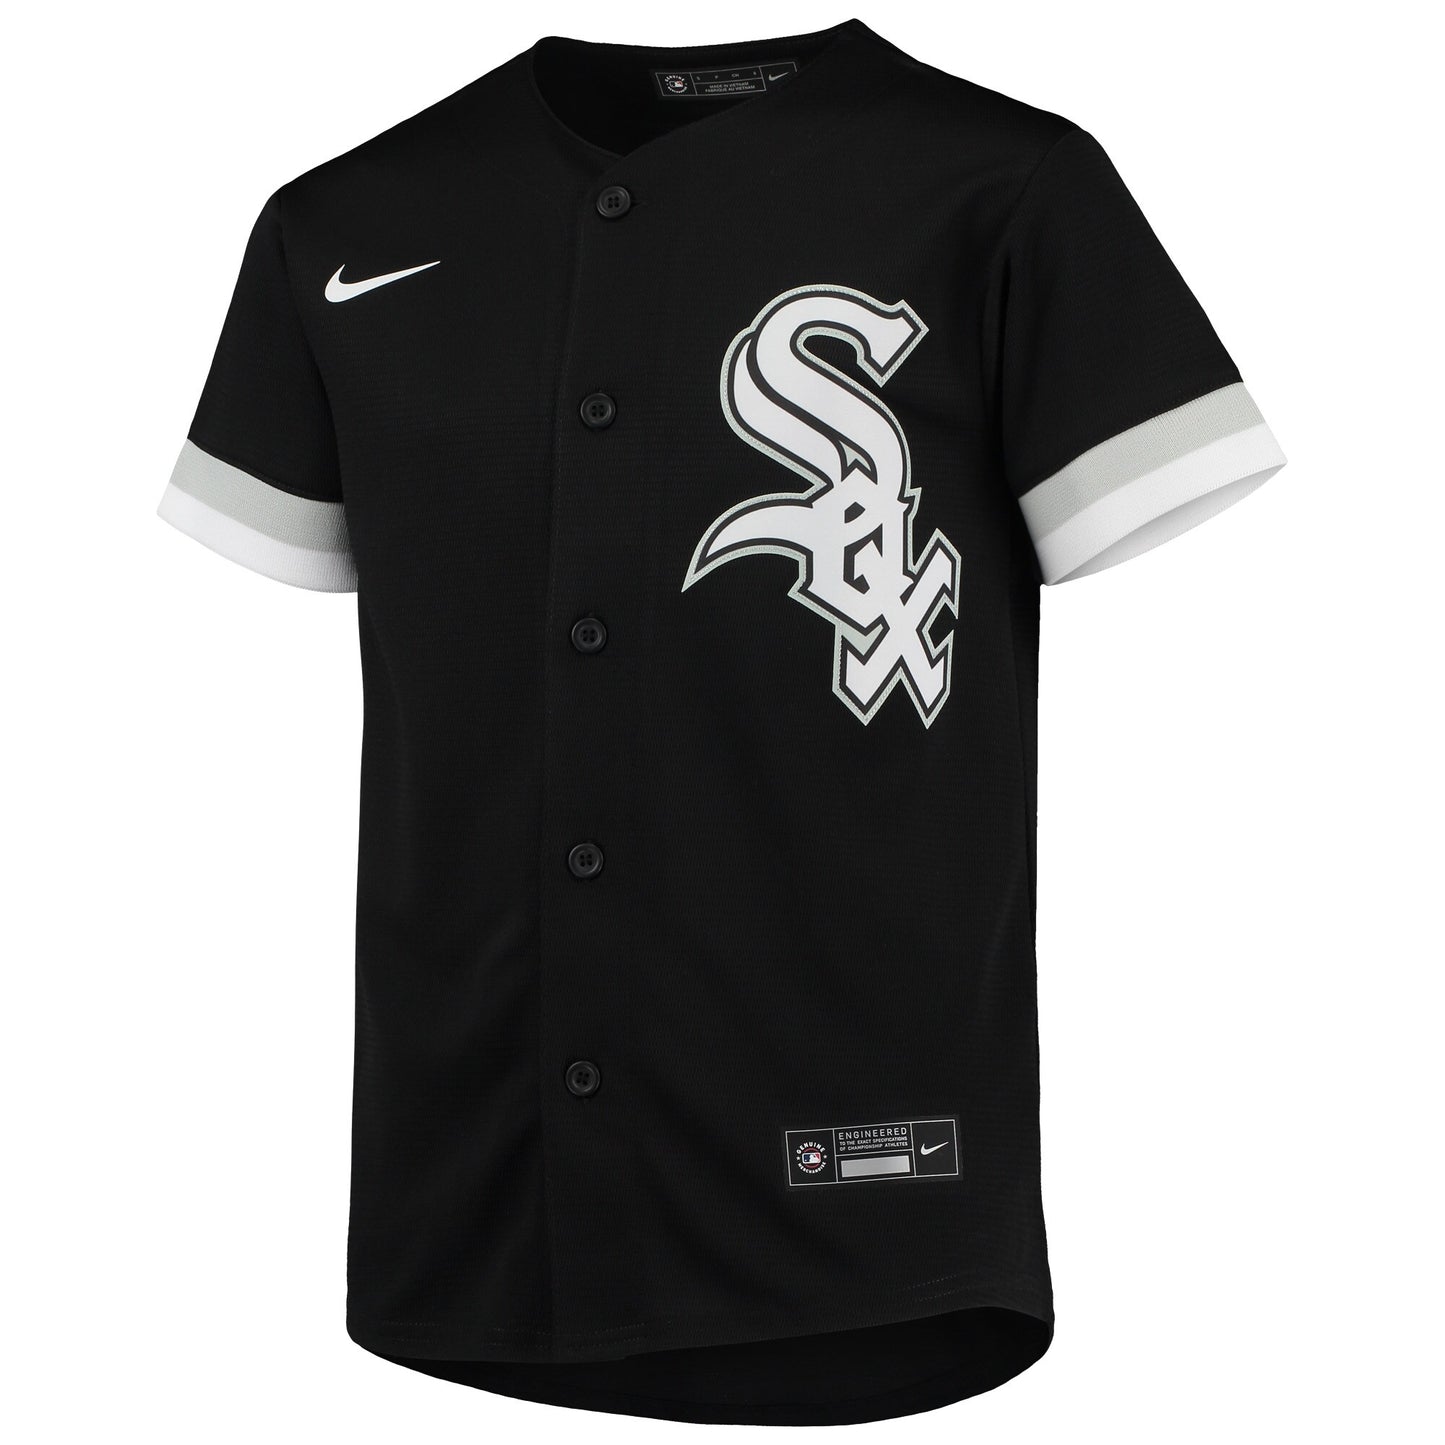 Youth Chicago White Sox Luis Robert Nike Black Alternate Replica Player Jersey